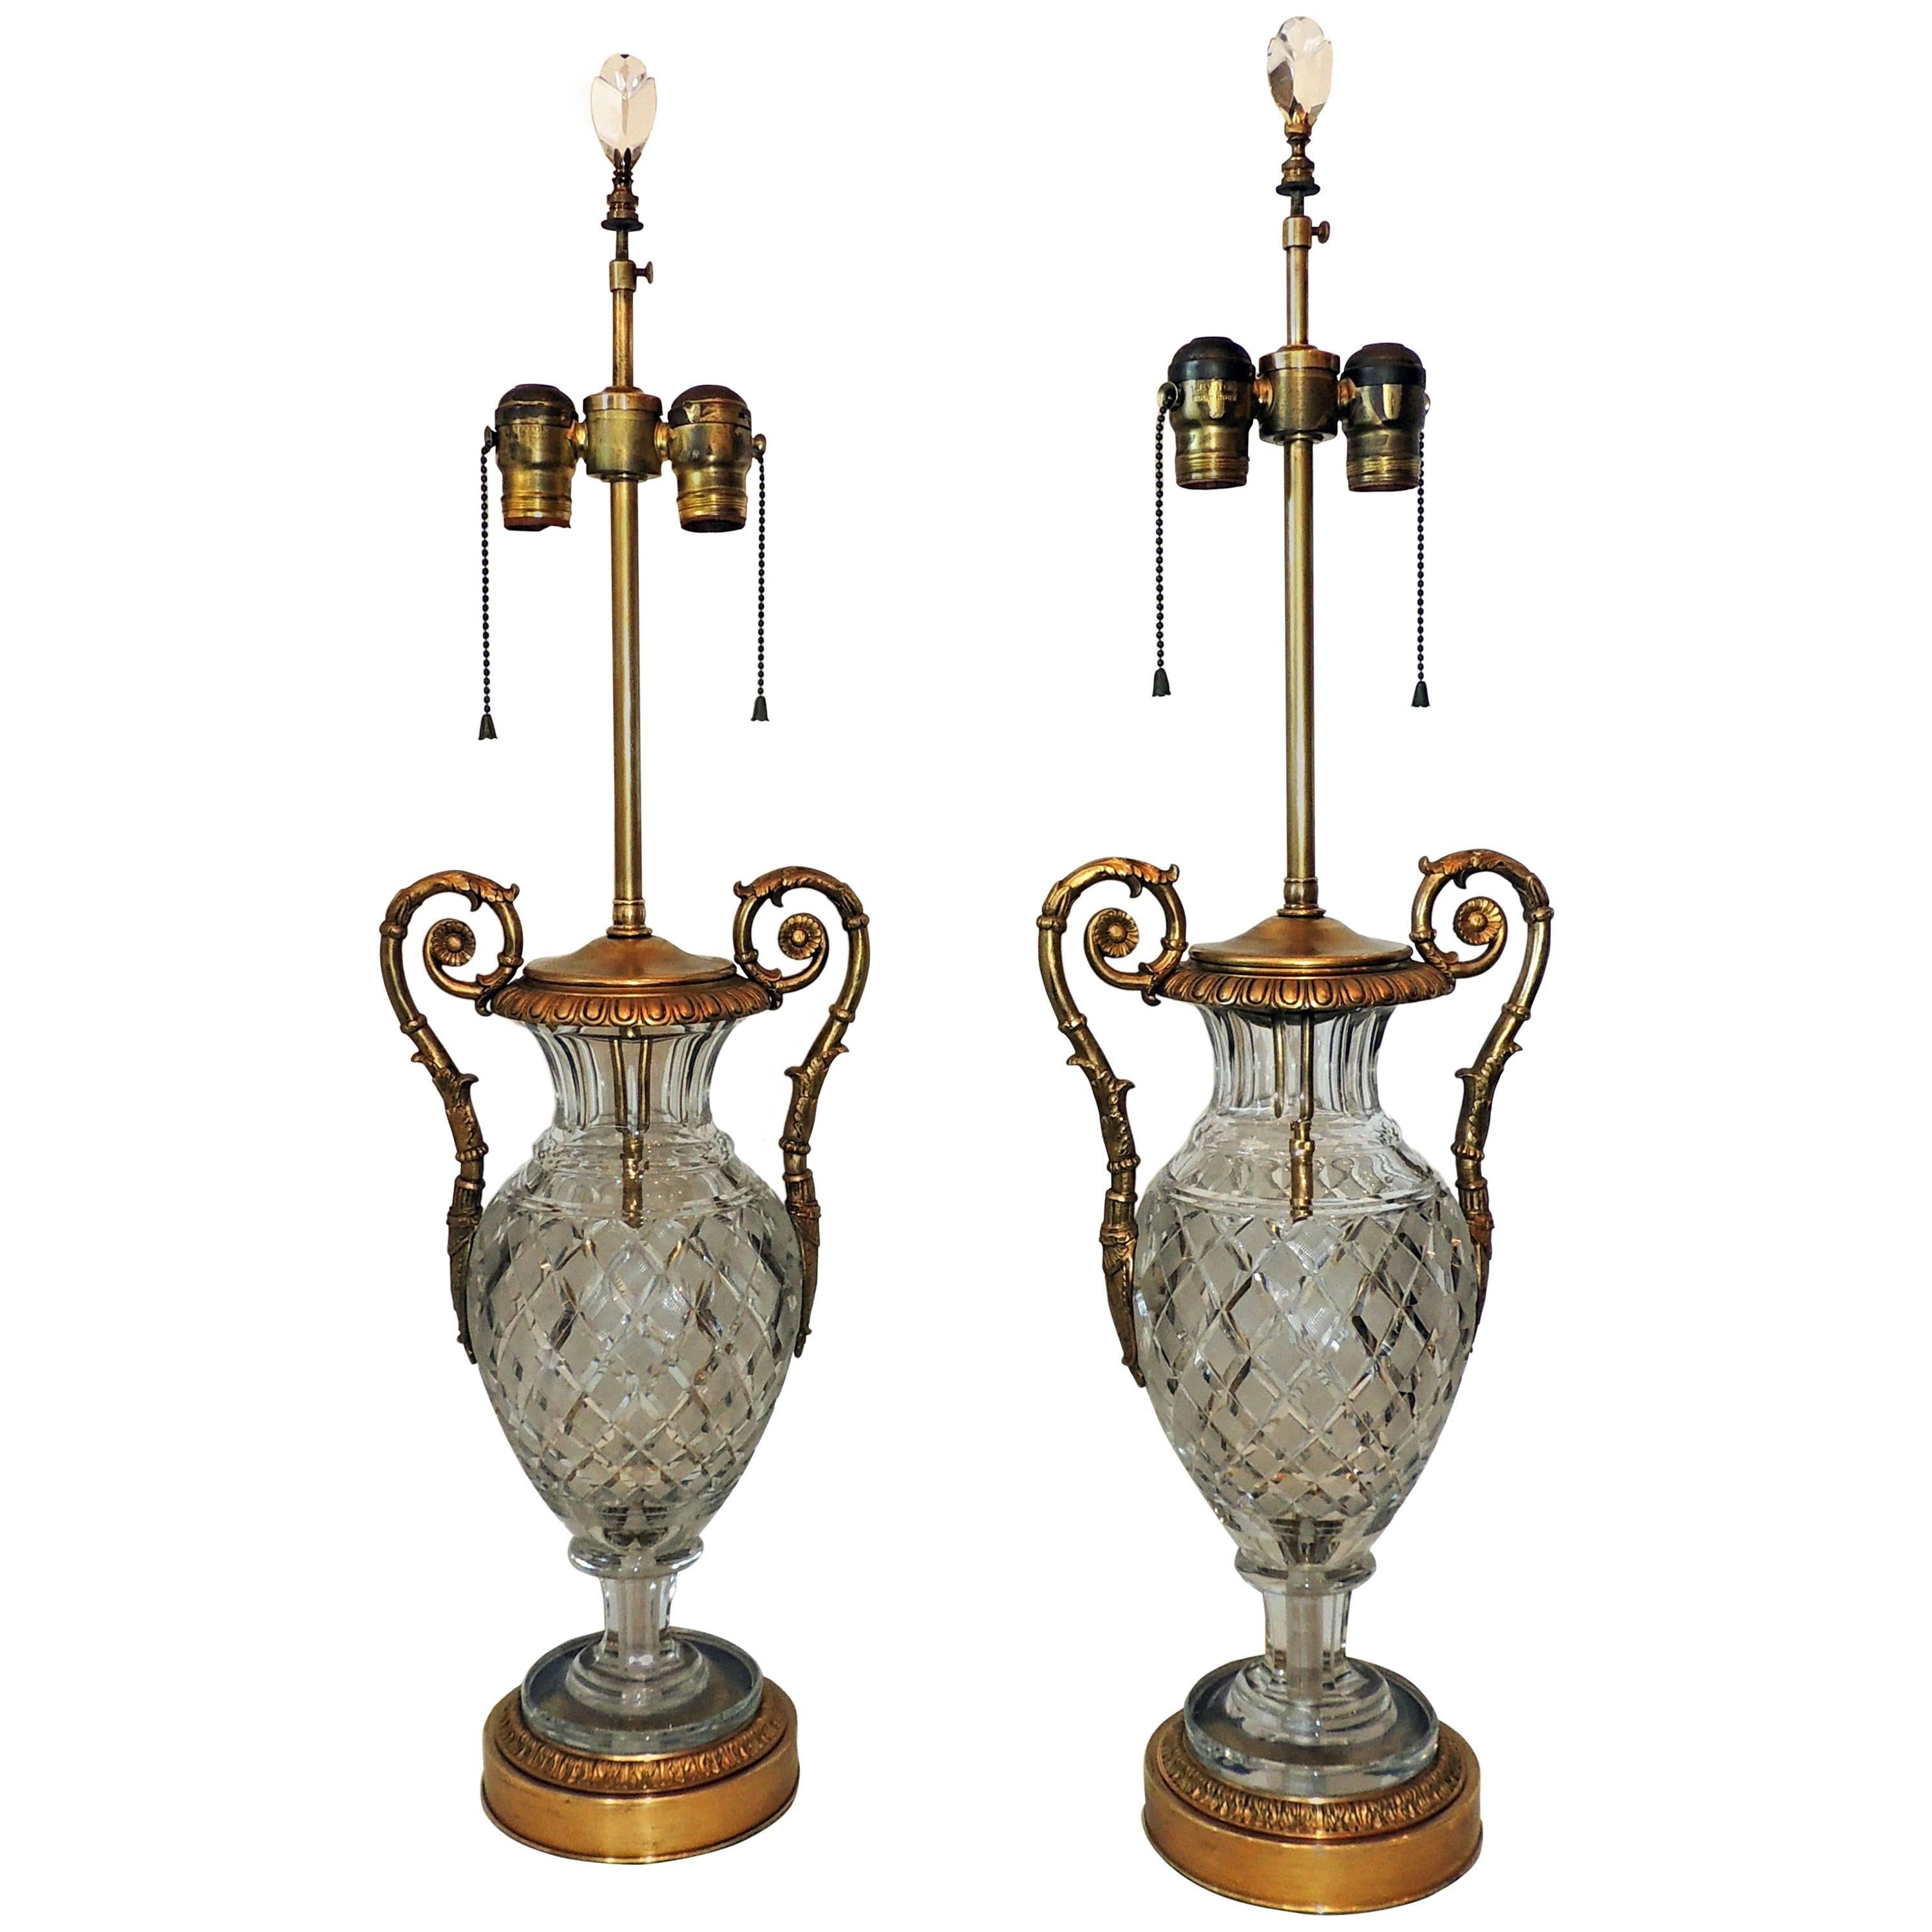 Beautiful Pair French Cut Crystal Doré Bronze Ormolu-Mounted Neoclassical Lamps